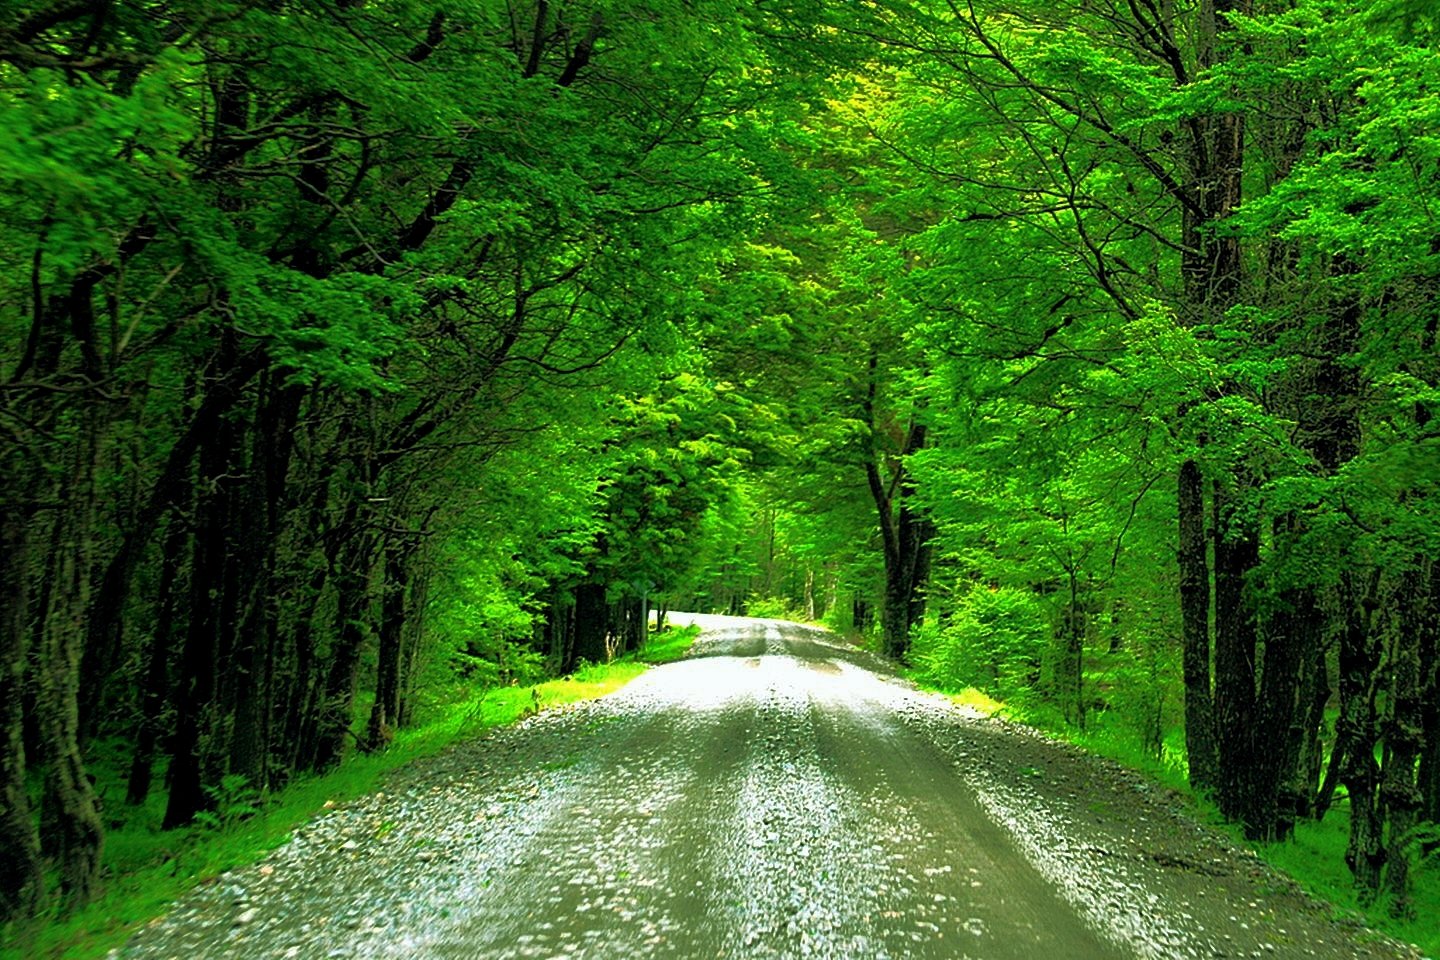 Road Lined with Green Trees